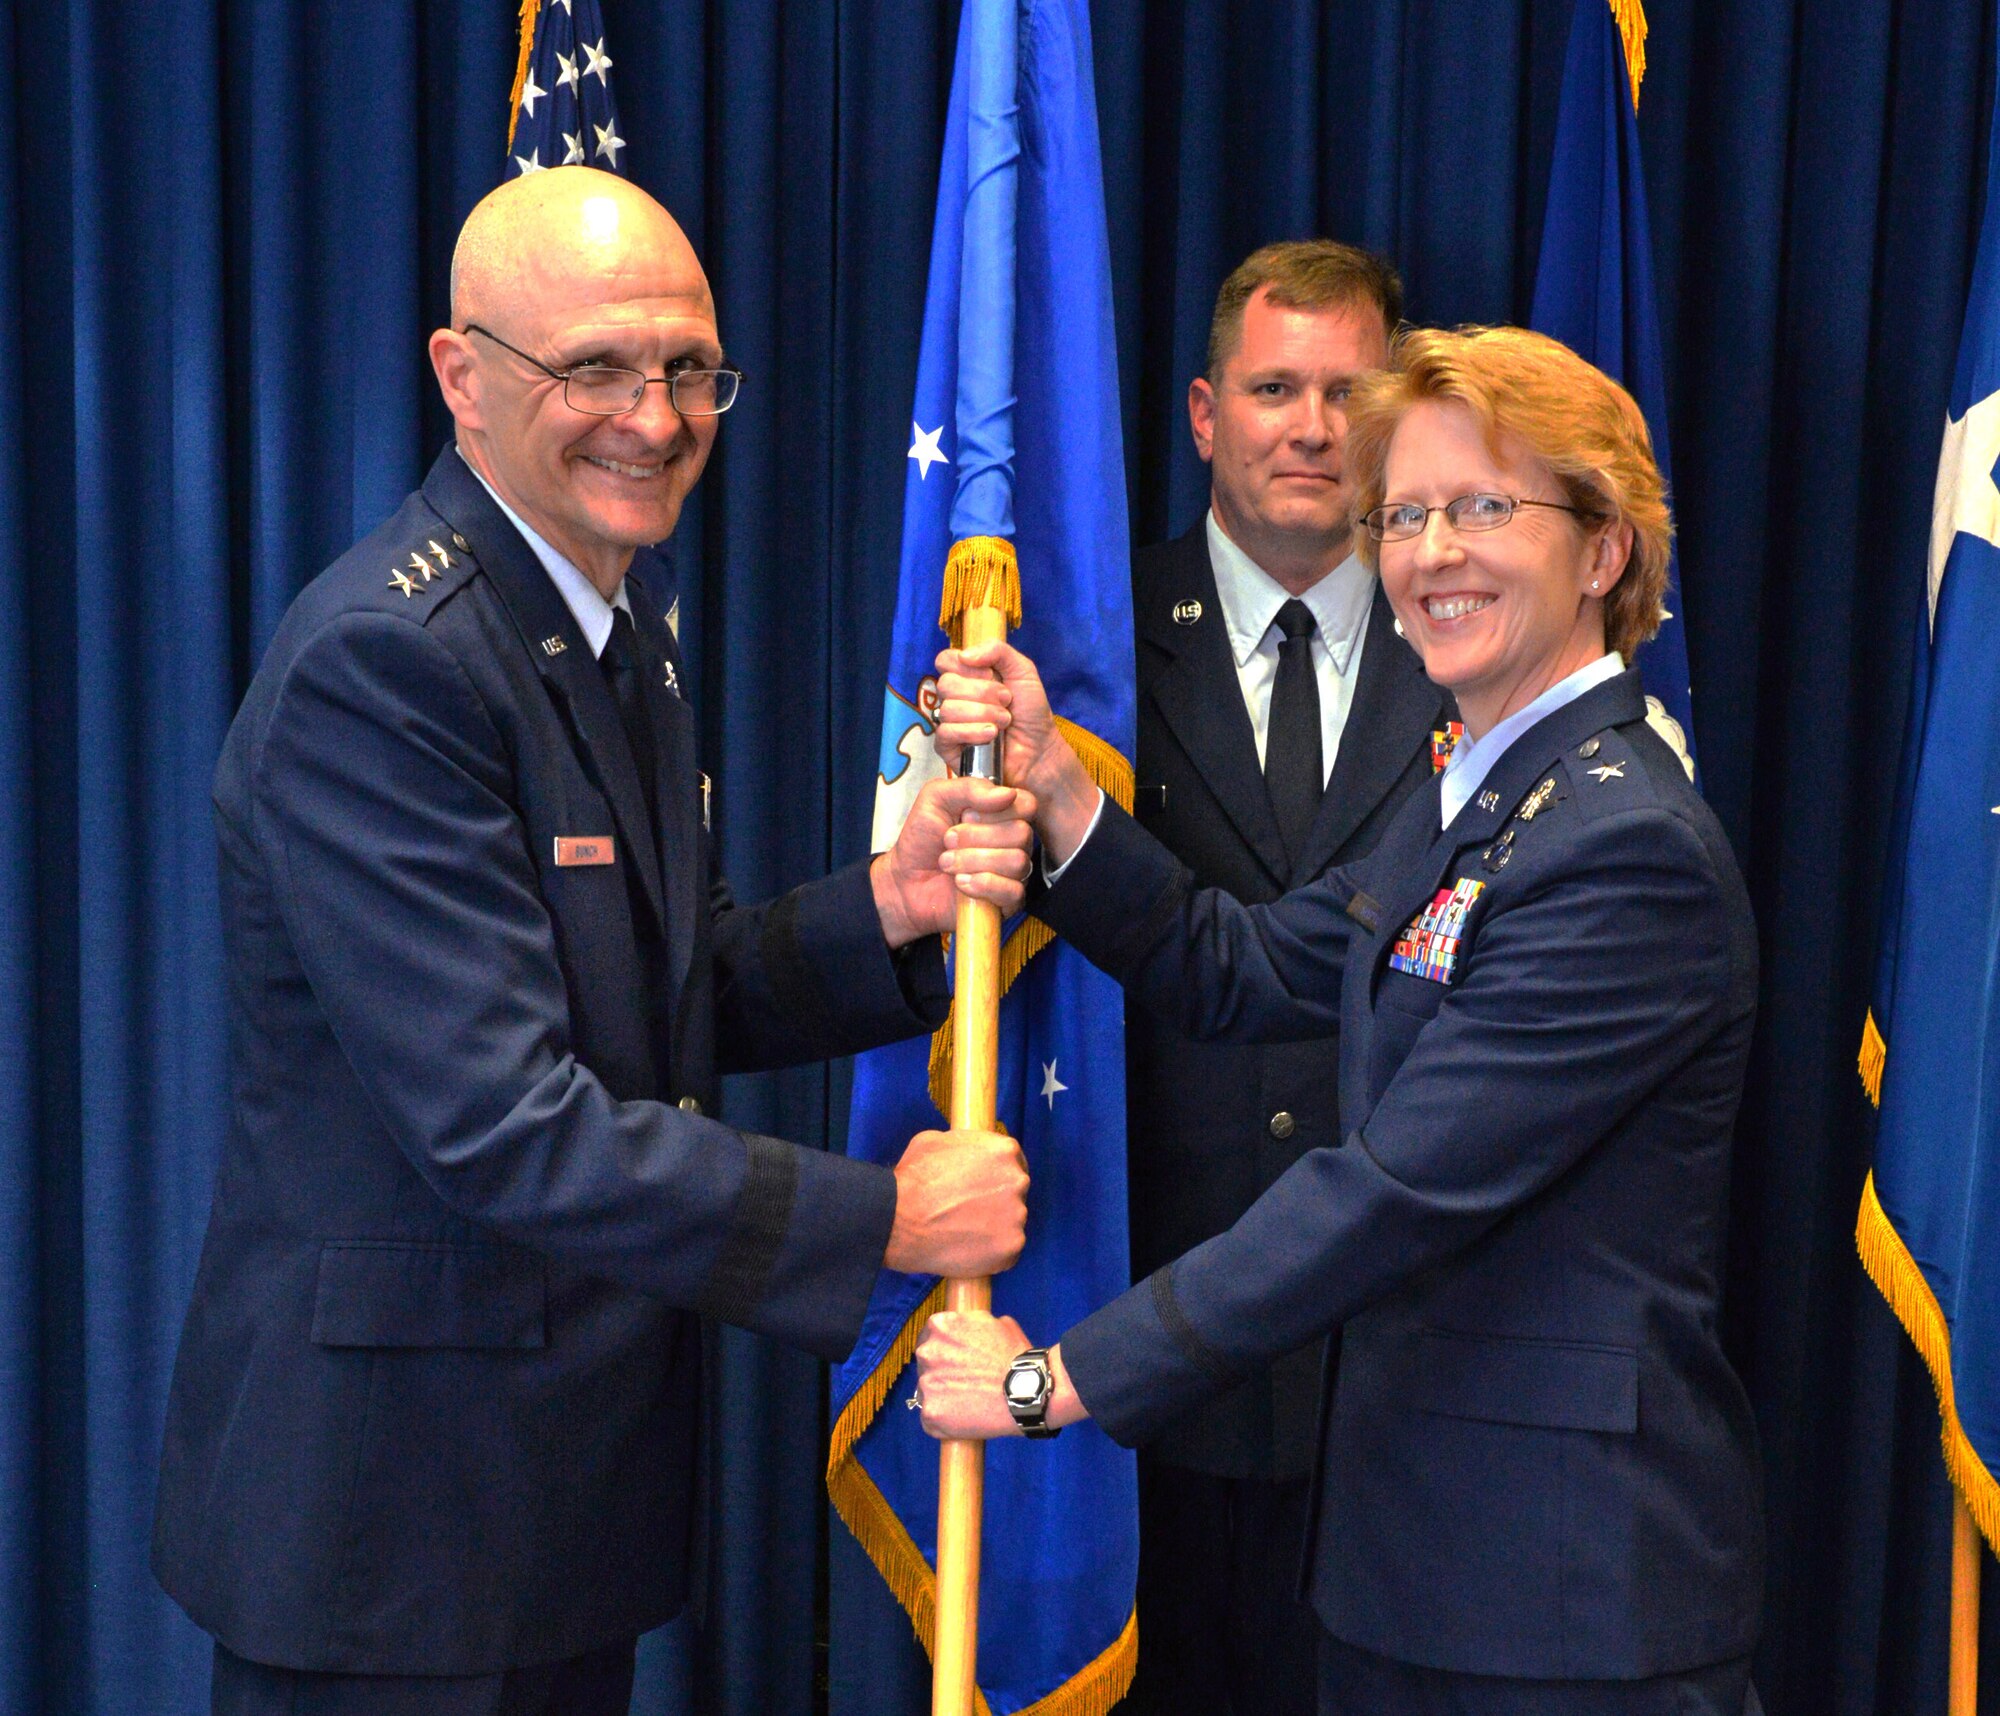 Lt. Gen. Arnold Bunch, Military Deputy, Office of the Assistant Secretary of the Air Force (Acquisition) (L), passes the guidon to Brig. Gen. Donna Shipton (R). Shipton is the new Program Executive Officer for the Tanker Directorate within the Air Force Life Cycle Management Center. In this role she is responsible for the planning and execution of all life cycle activities for the Air Force Tanker fleet. (U.S. Air Force photo / Al Bright) 